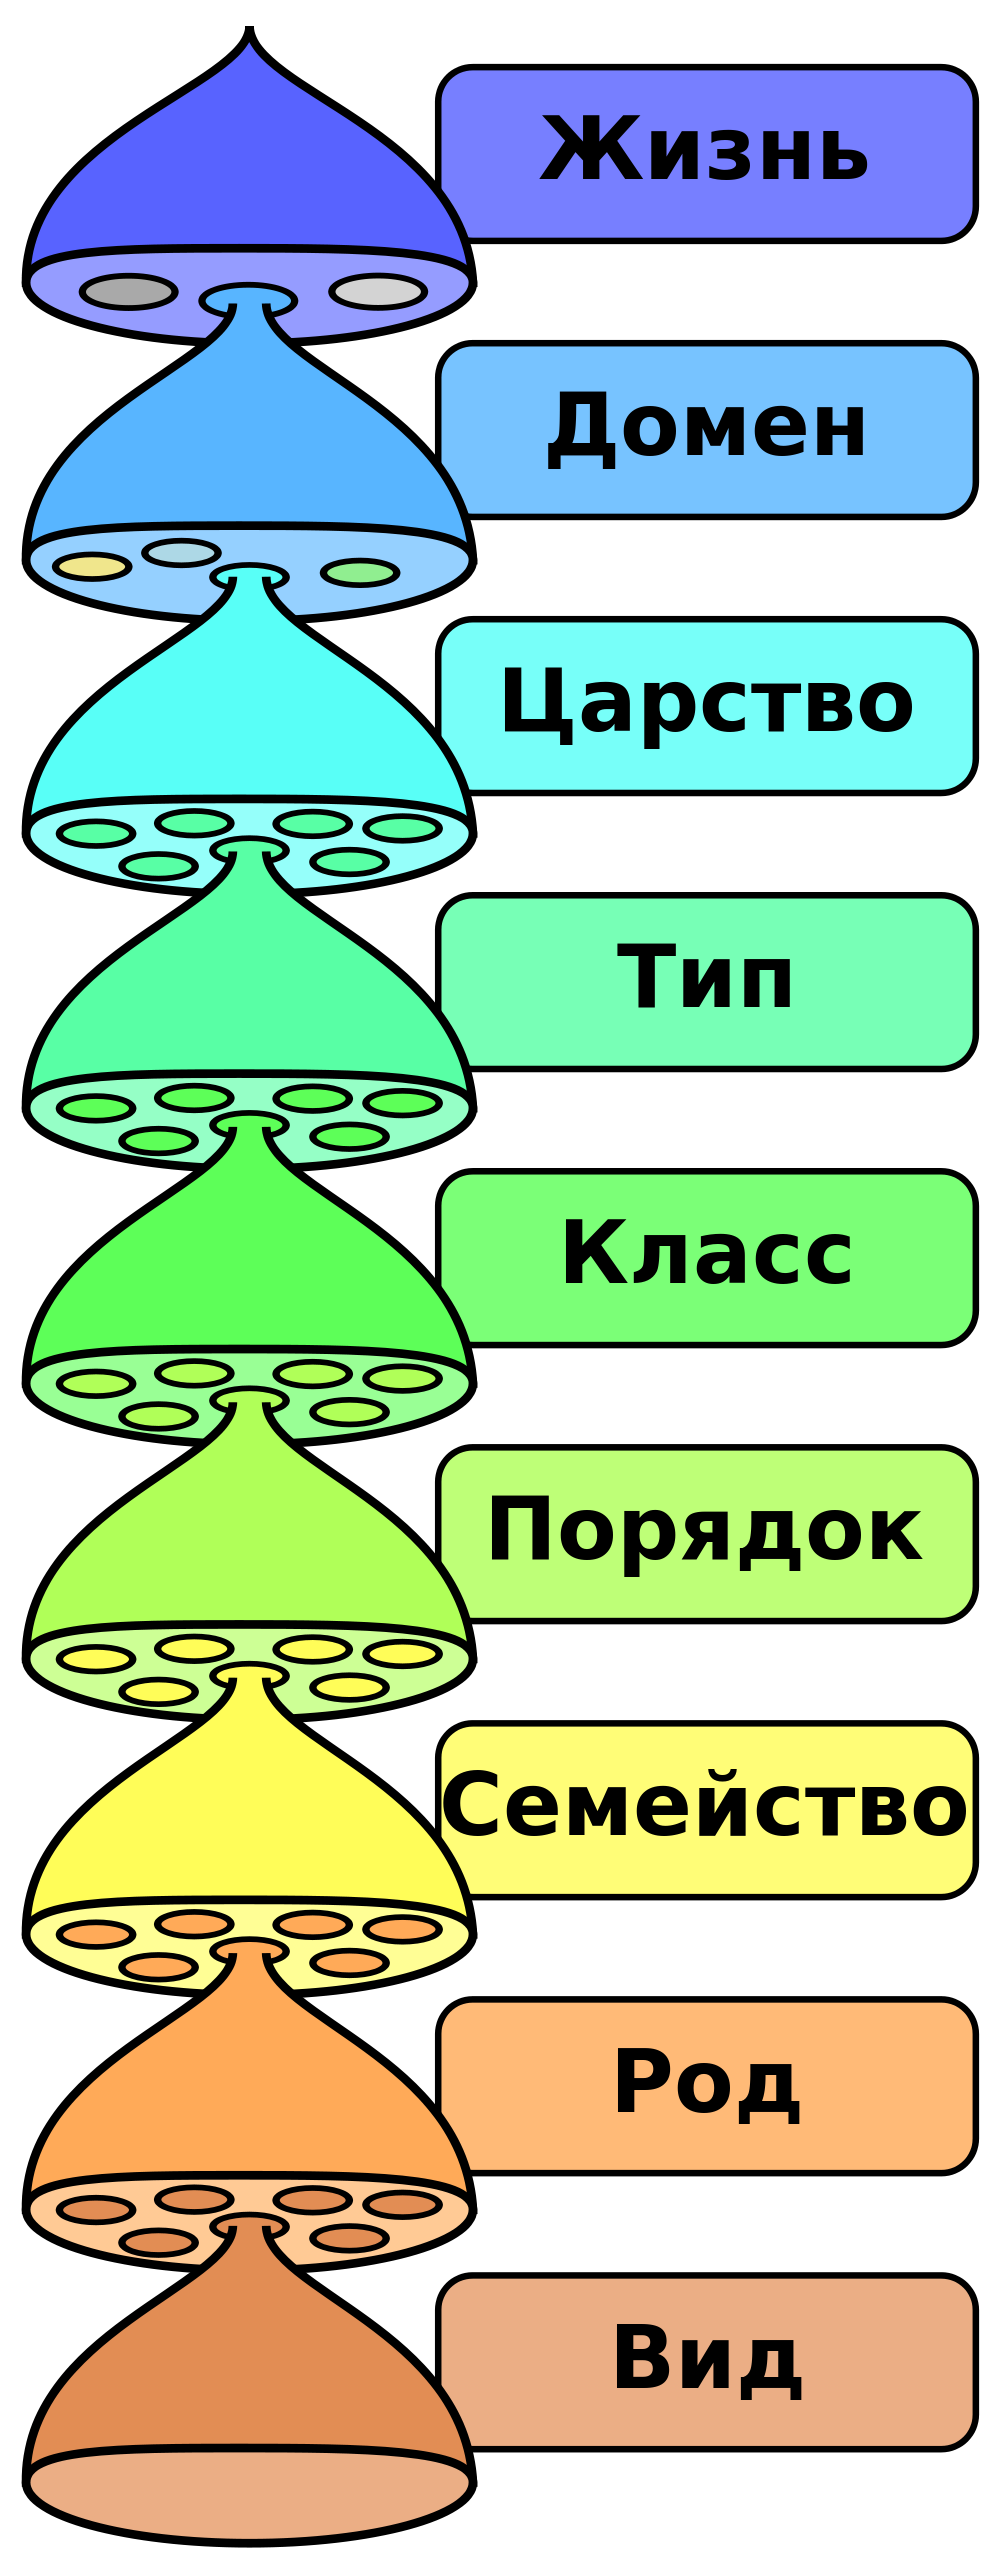 Russian svg #4, Download drawings